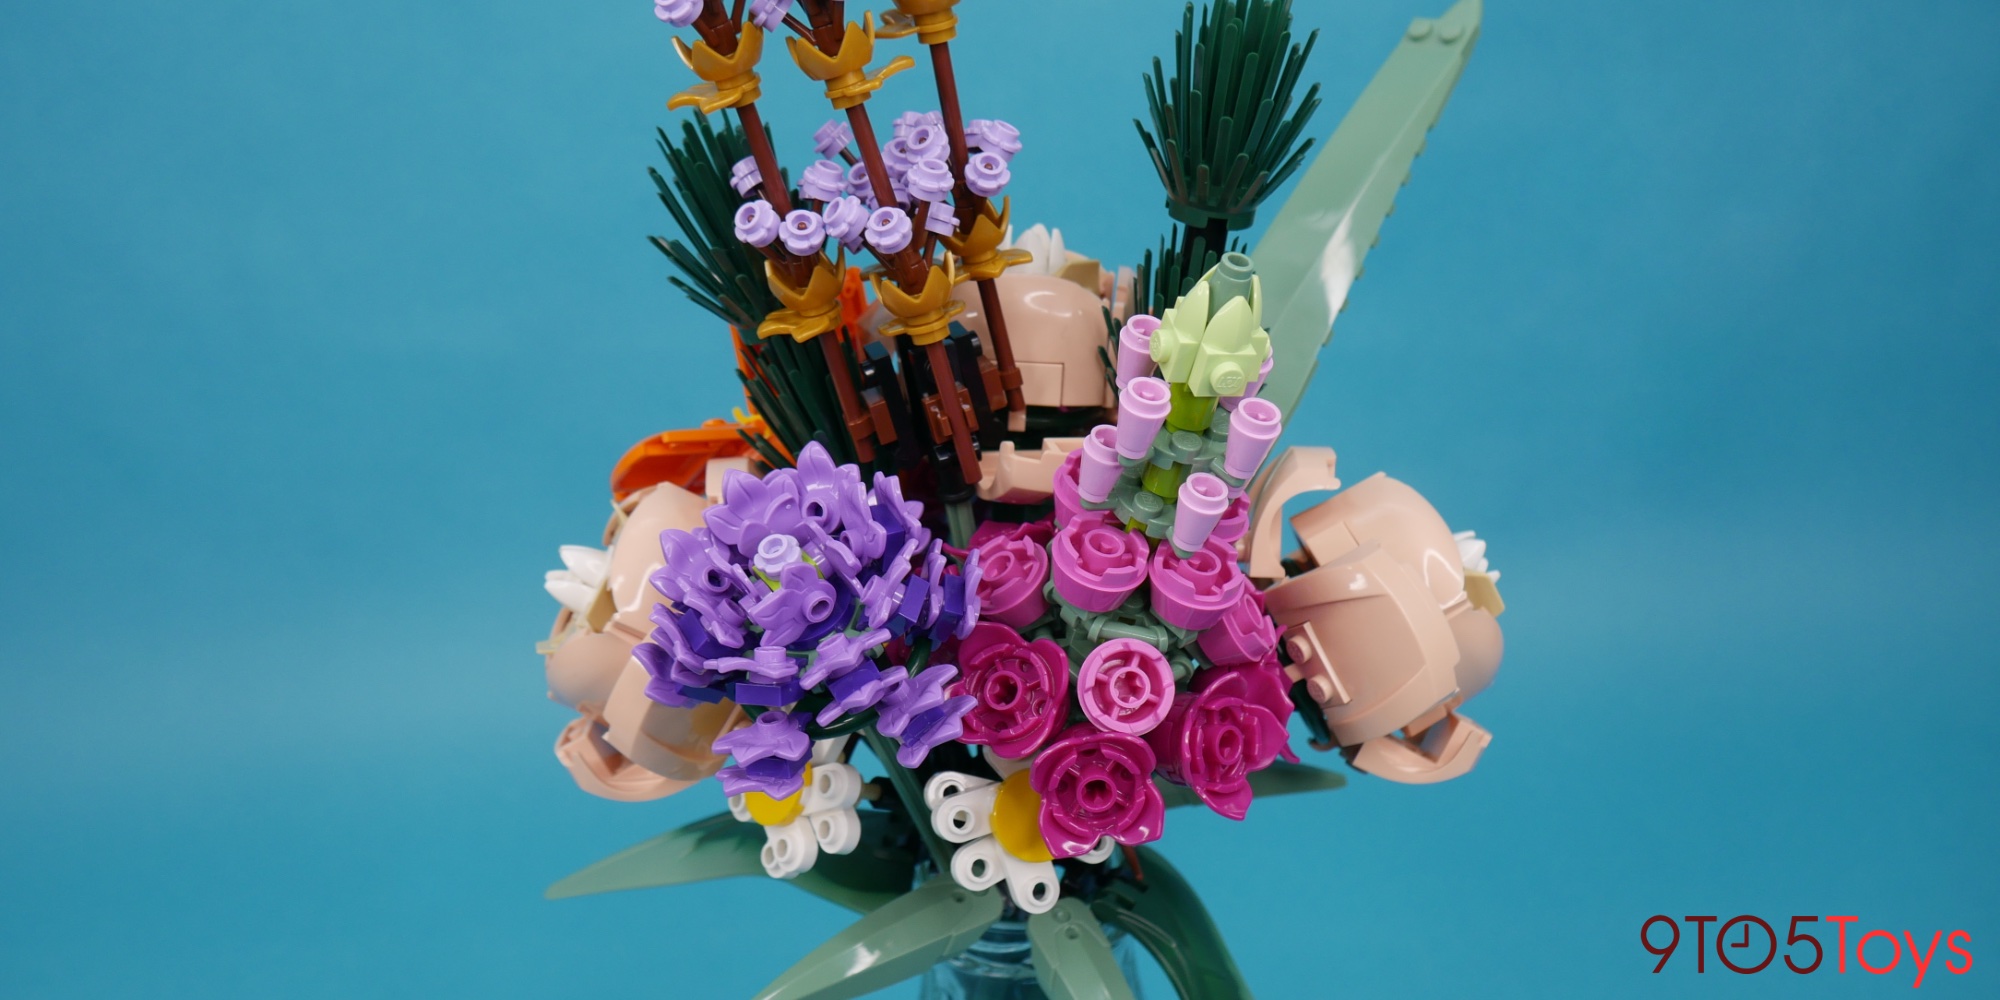 LEGO Is Releasing a Bouquet of Roses Set Just In Time for Valentine's Day